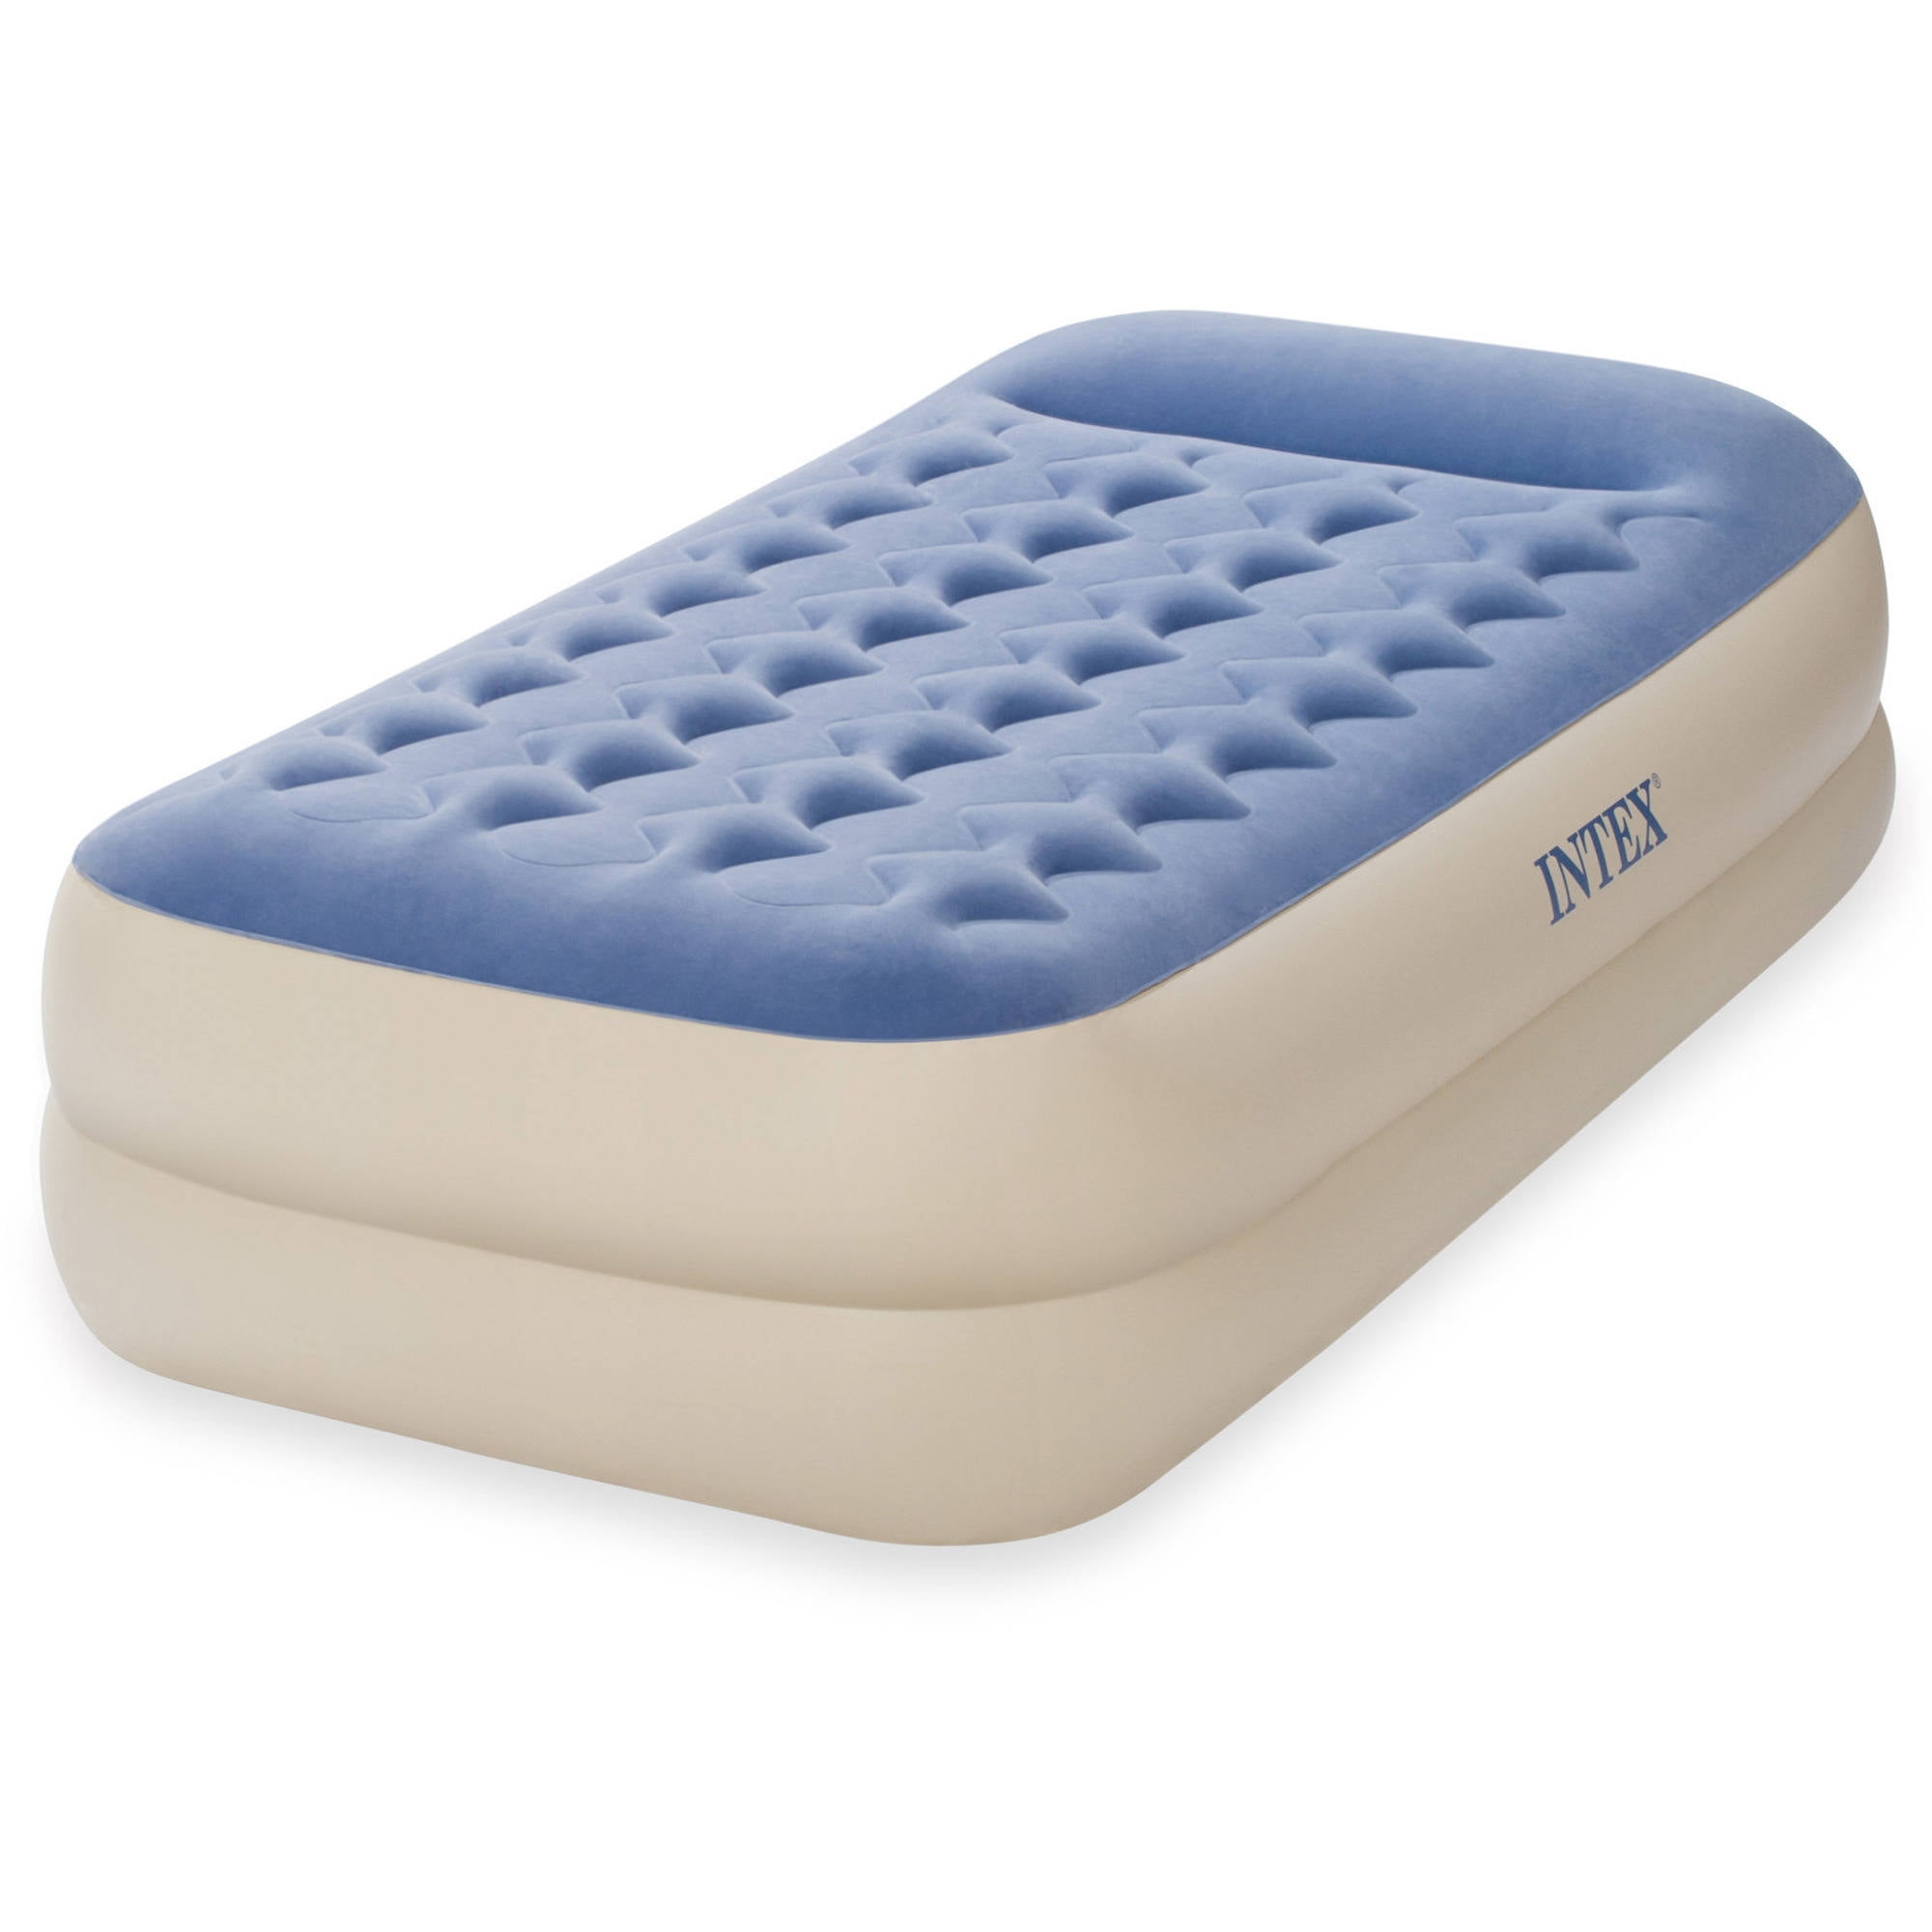 Open Box Intex Twin Pillow Rest Raised Inflatable Airbed Mattress with Pump 